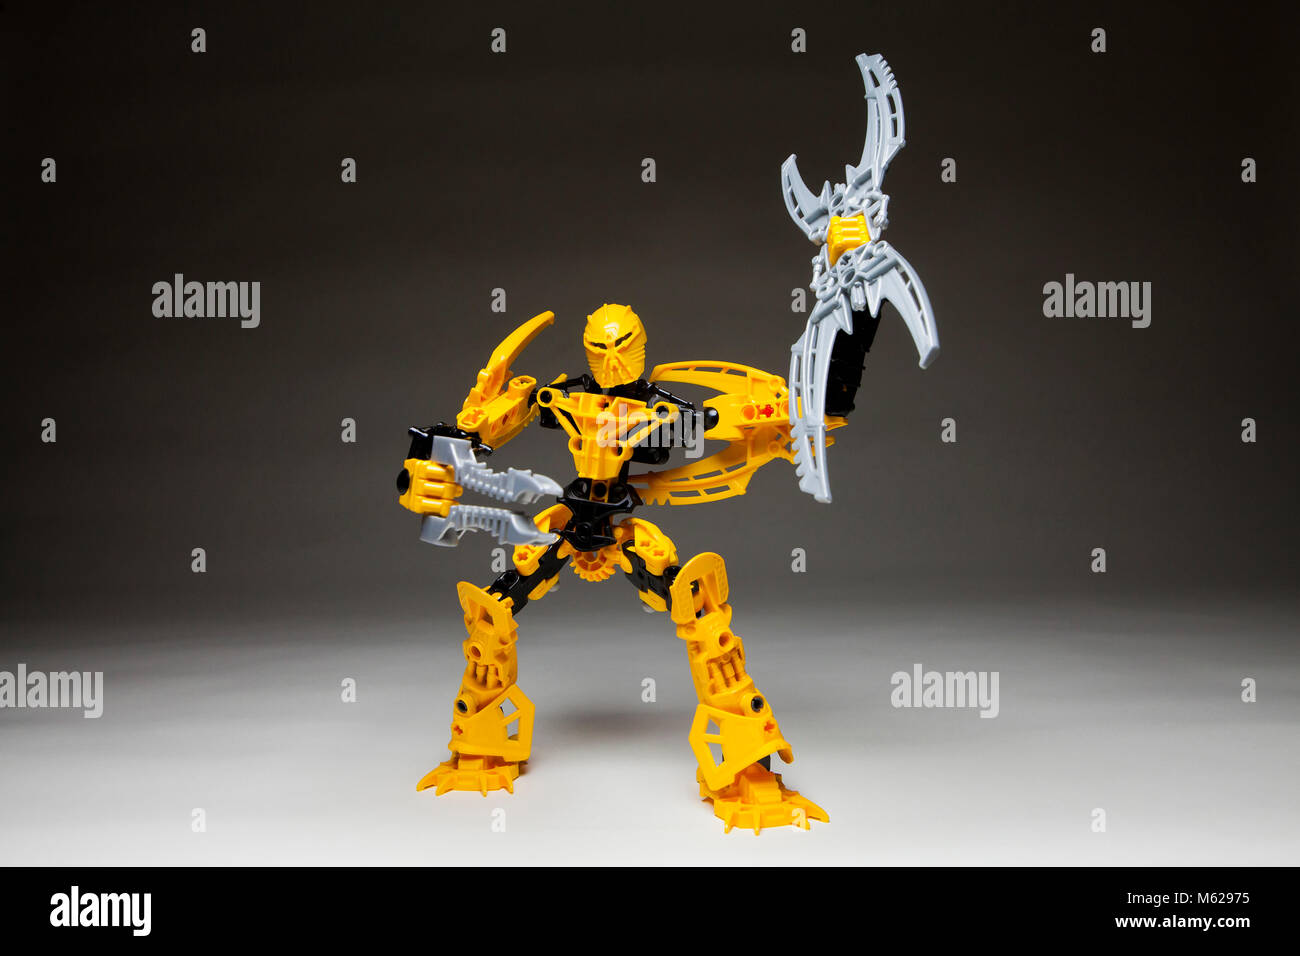 LEGO Bionicle - USA Banque D'Images